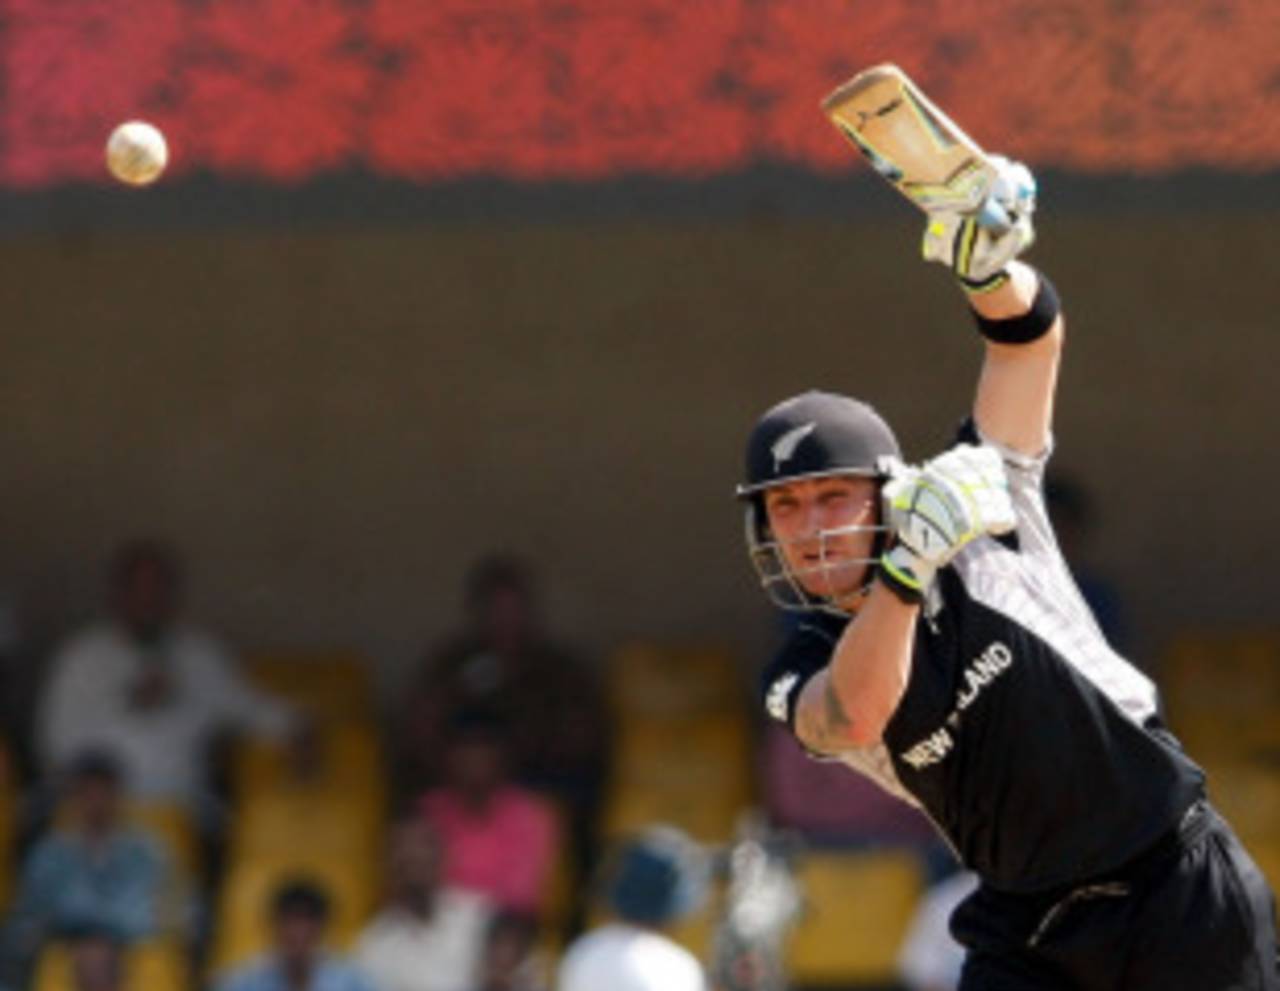 Brendon McCullum shows he can do it one-handed, New Zealand v Zimbabwe, Group A, World Cup 2011, Motera, March 4, 2011